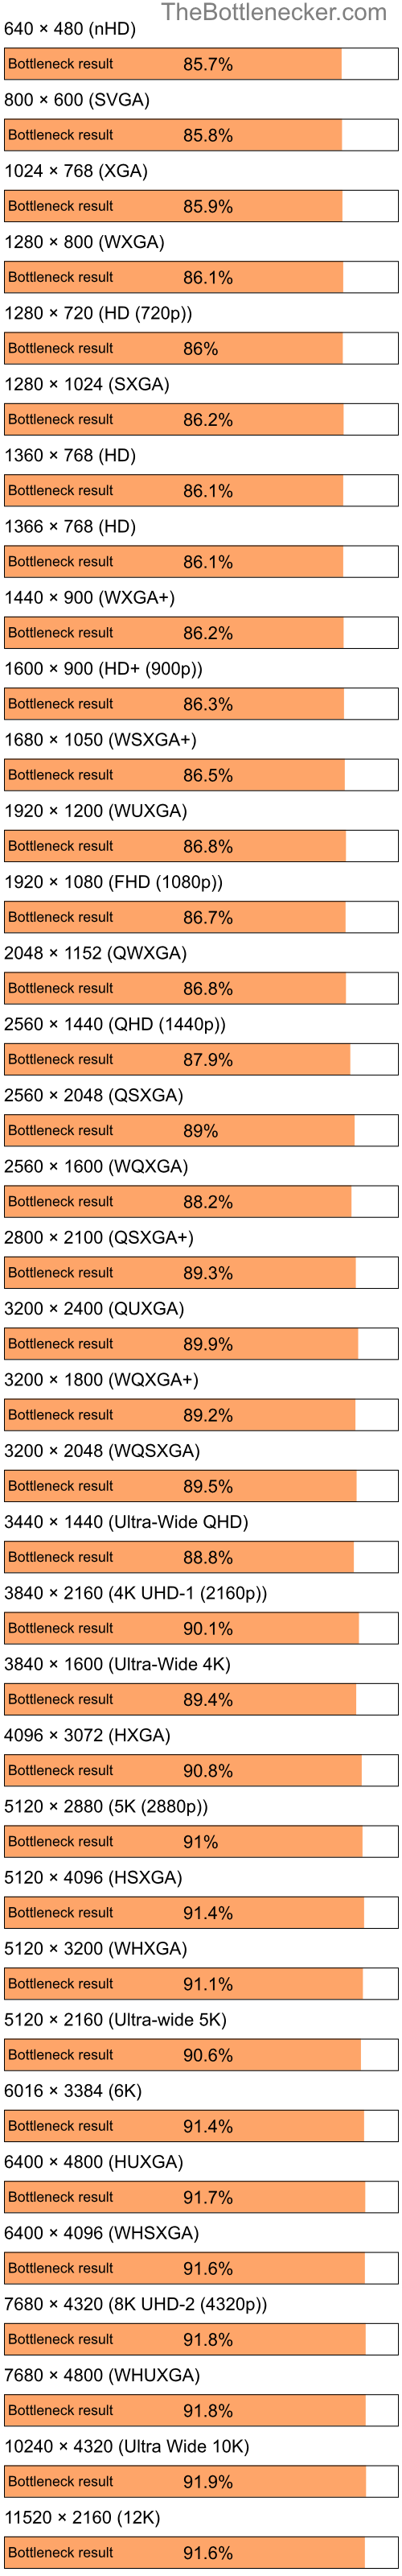 Bottleneck results by resolution for Intel Celeron and NVIDIA GeForce Go 6200 in Graphic Card Intense Tasks